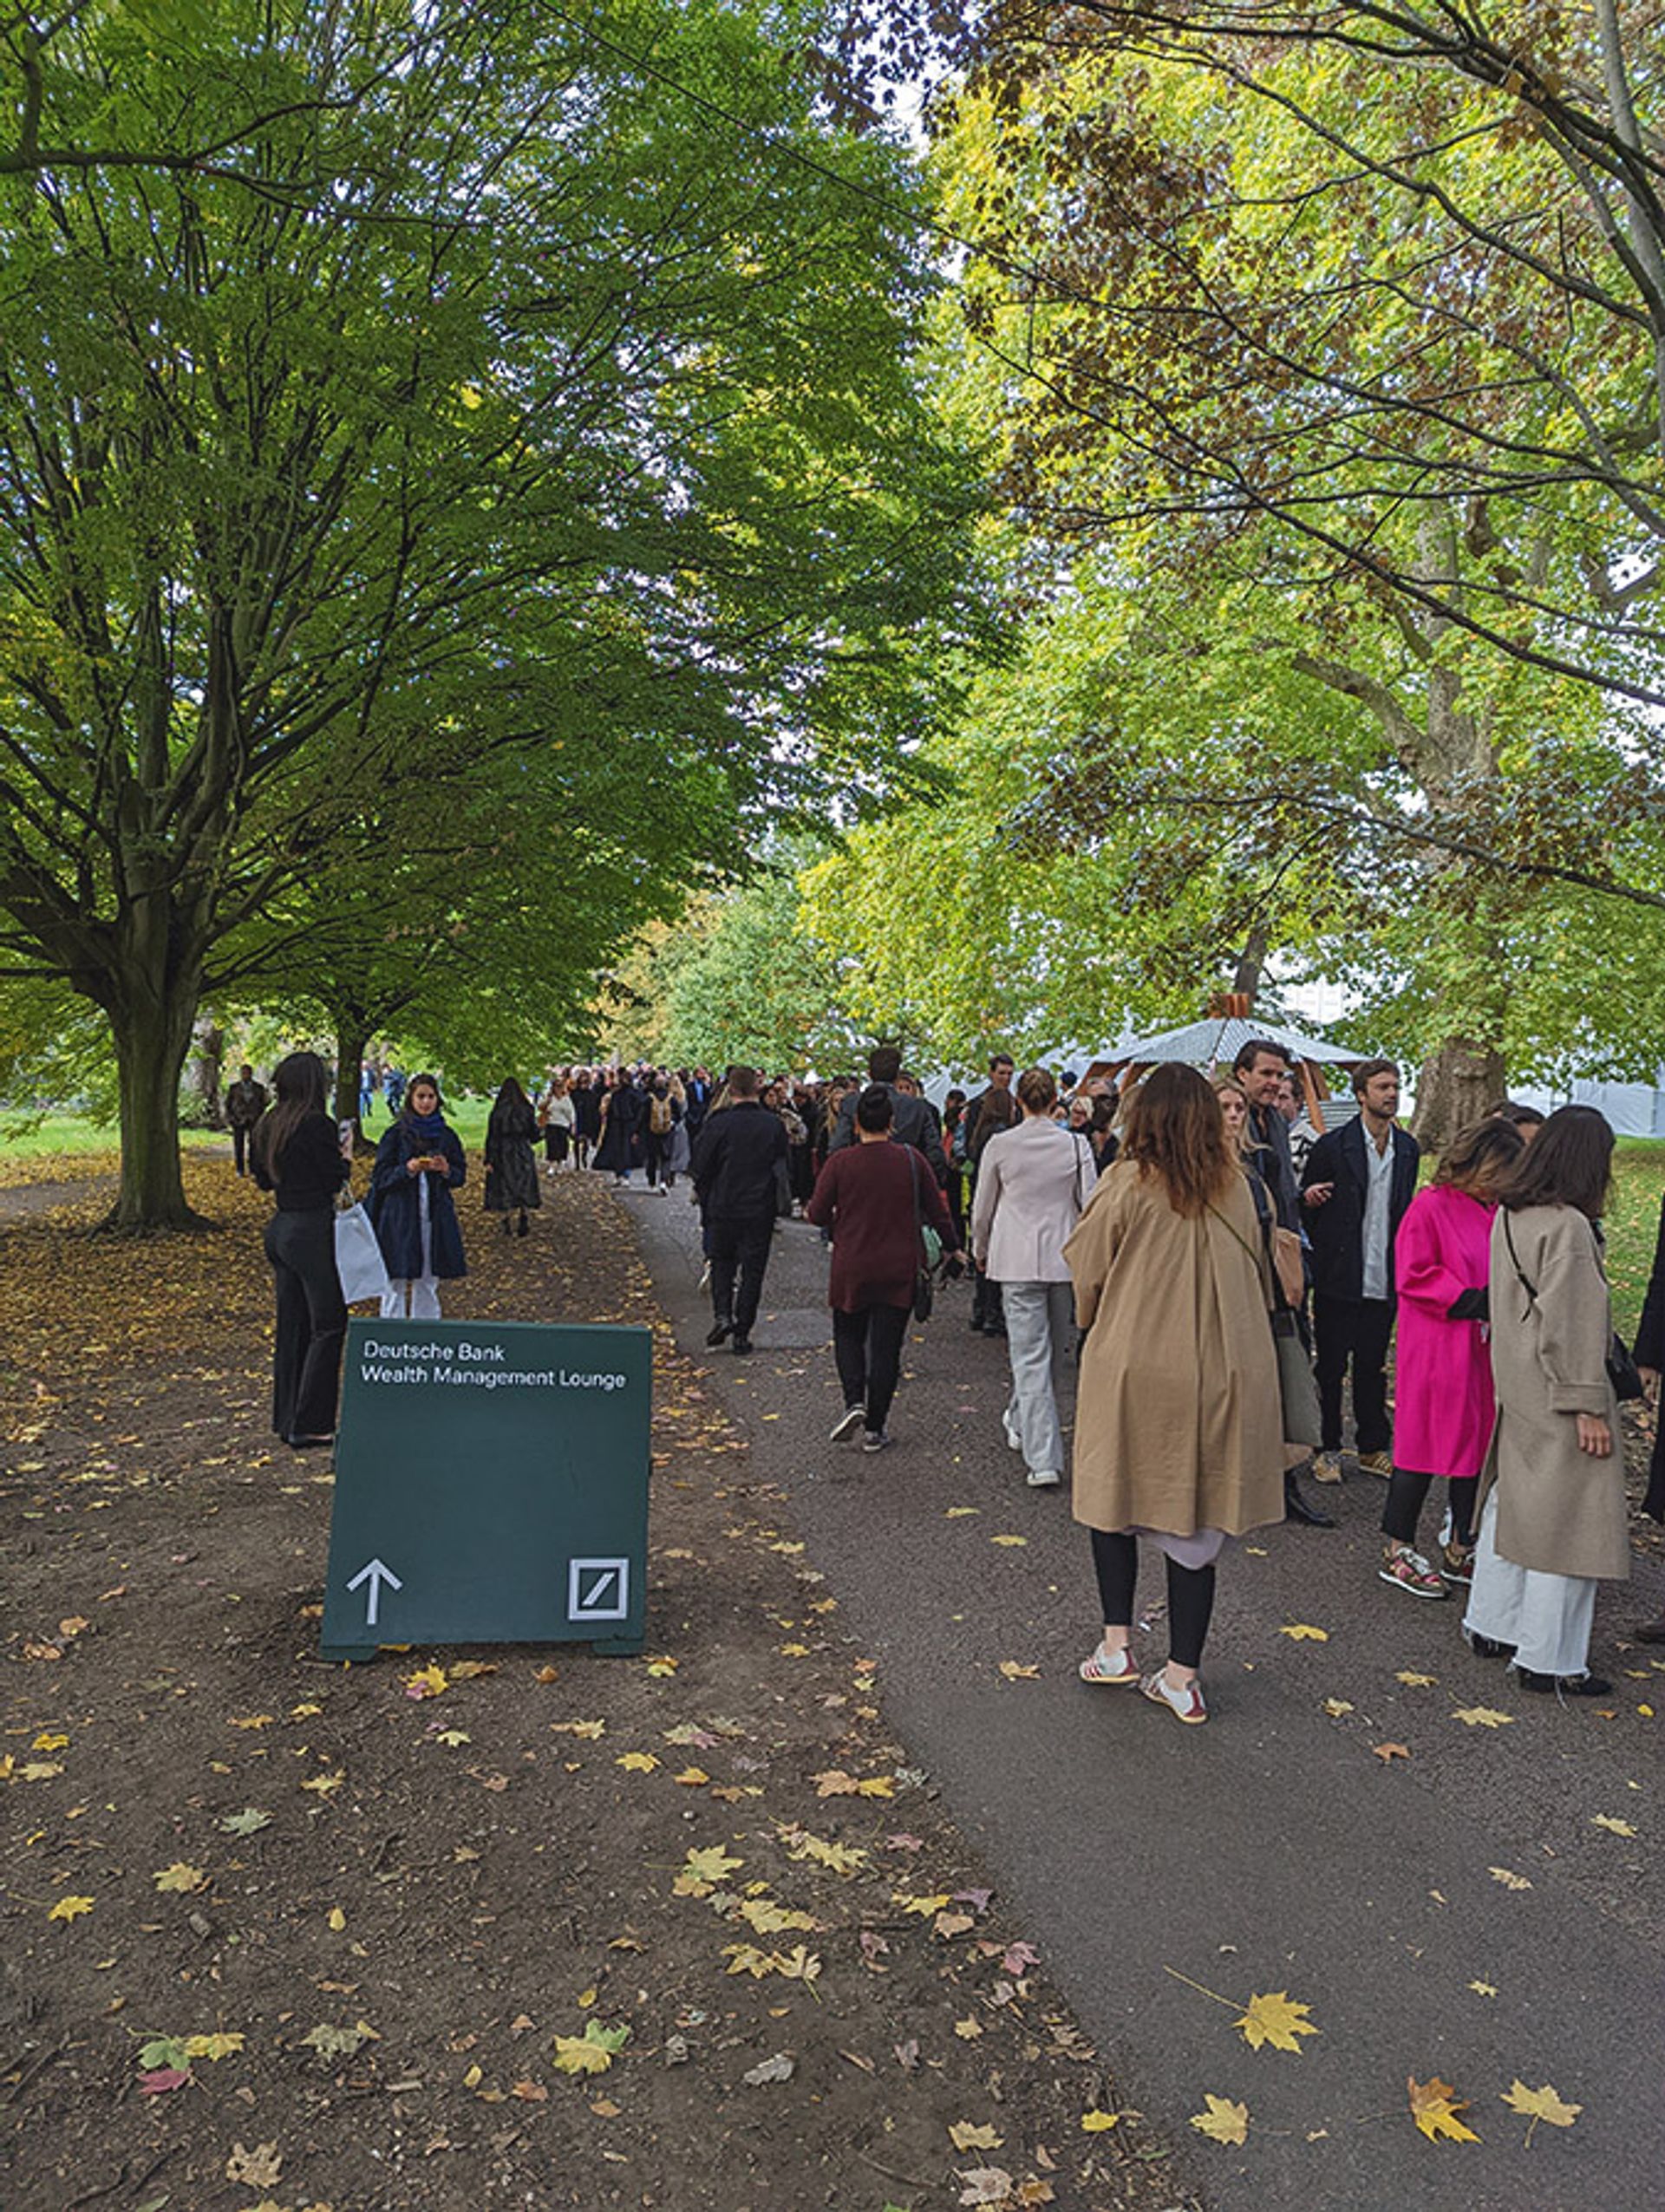 The line of visitors waiting to enter Frieze London’s preview stretched all the way down a path in Regent’s Park Lee Cheshire